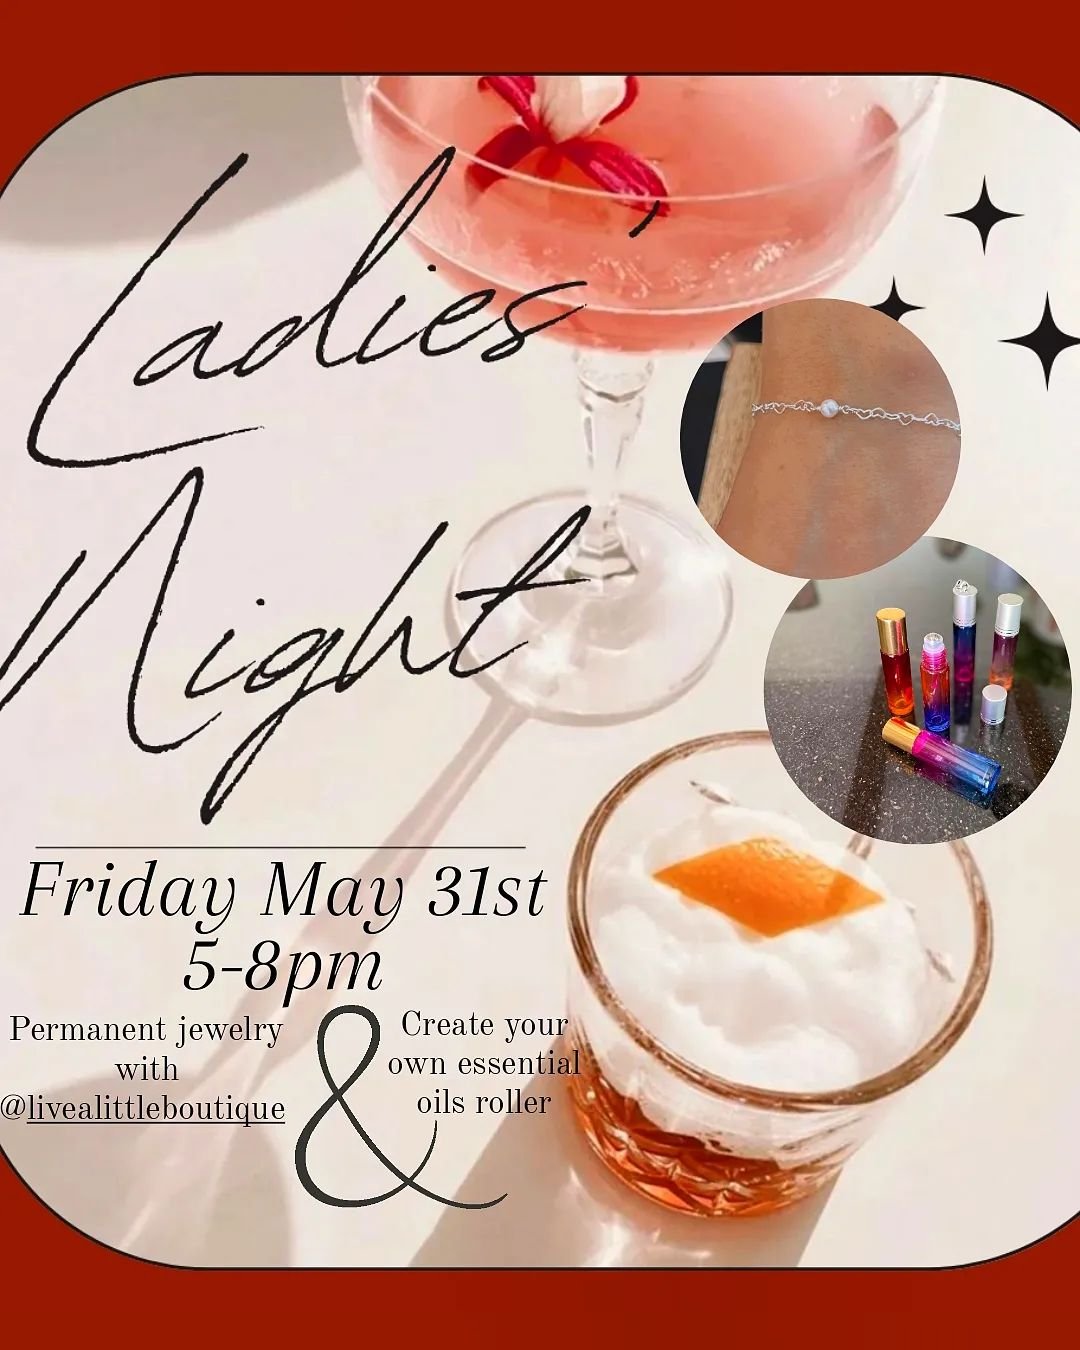 Adonia is bringing another ladies night to the calendar!!!

Mark it down!
FRIDAY MAY 31ST 5-8PM

We will have :
@livealittleboutique here doing permanent jewelry 
We will also have Kim here with a build your own essential oil roll on bar!
Roll ons wi